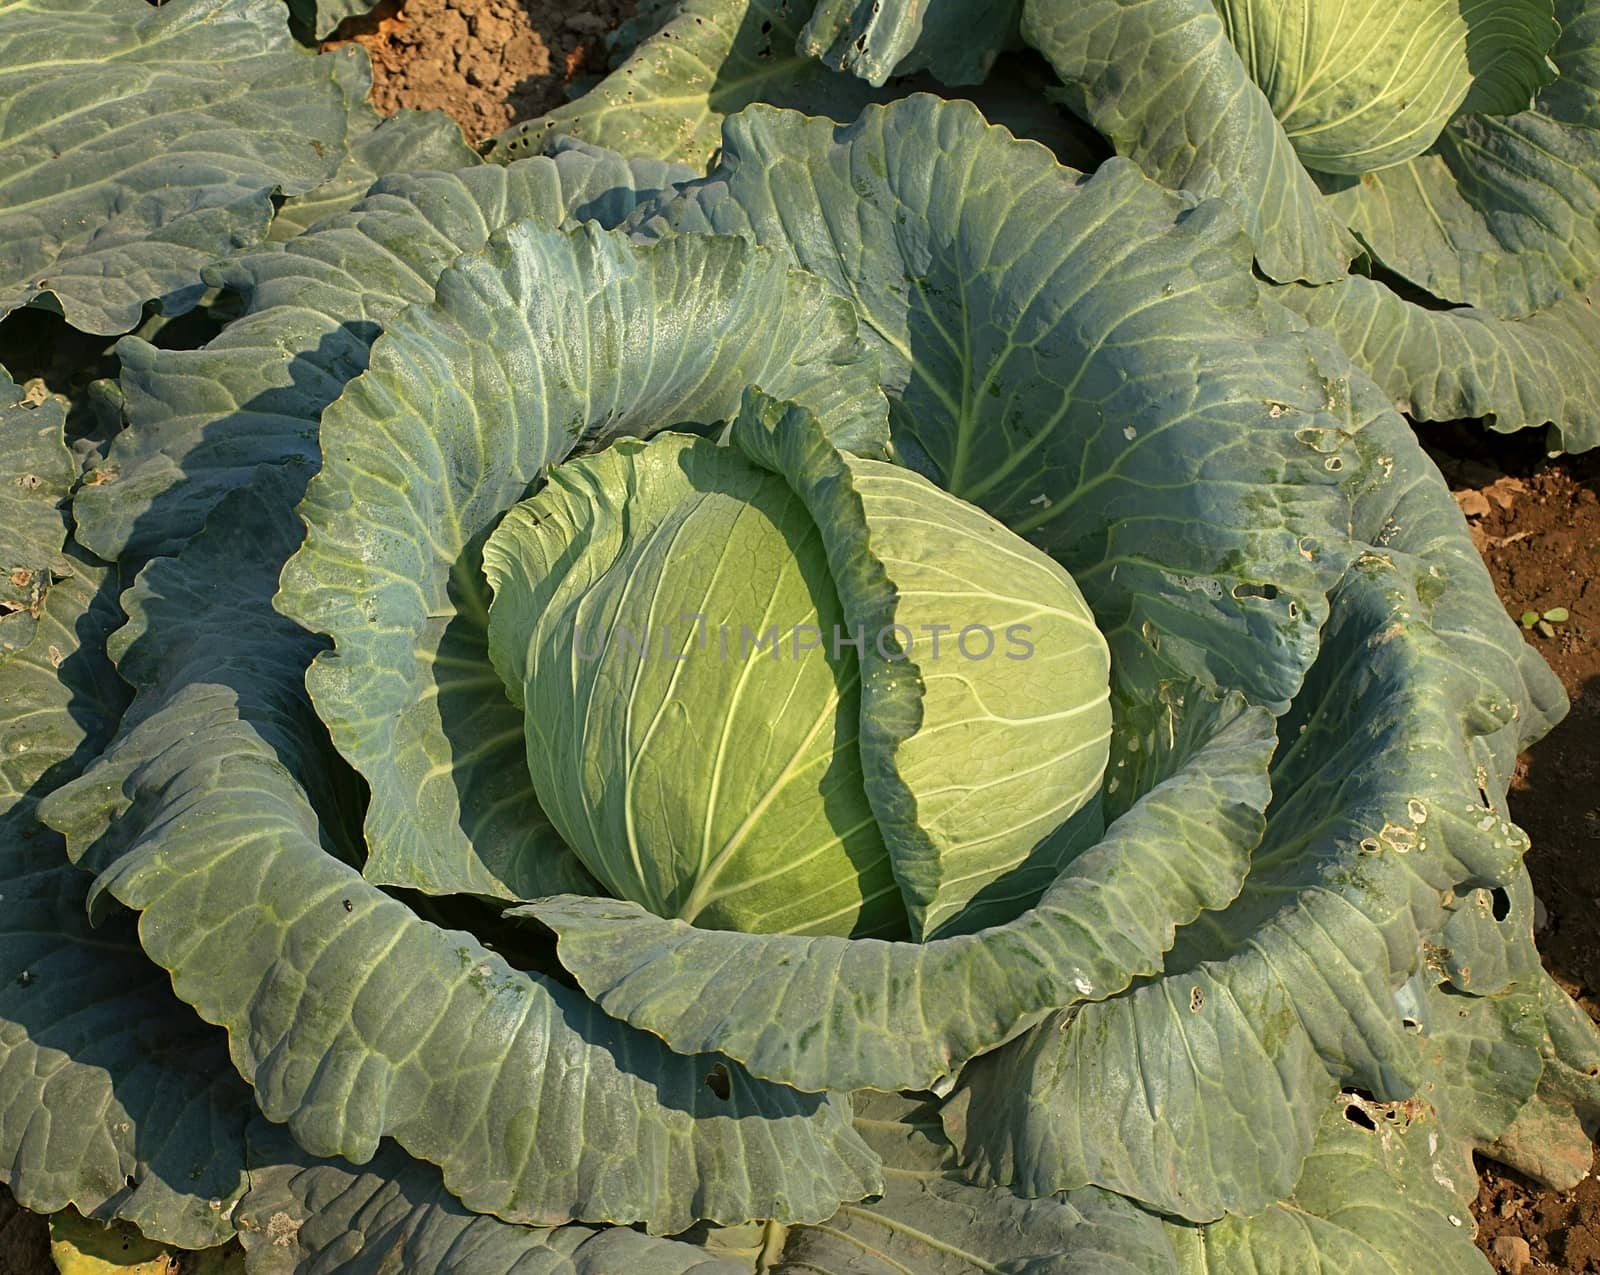 A large head of green cabbage in a vegetable field
